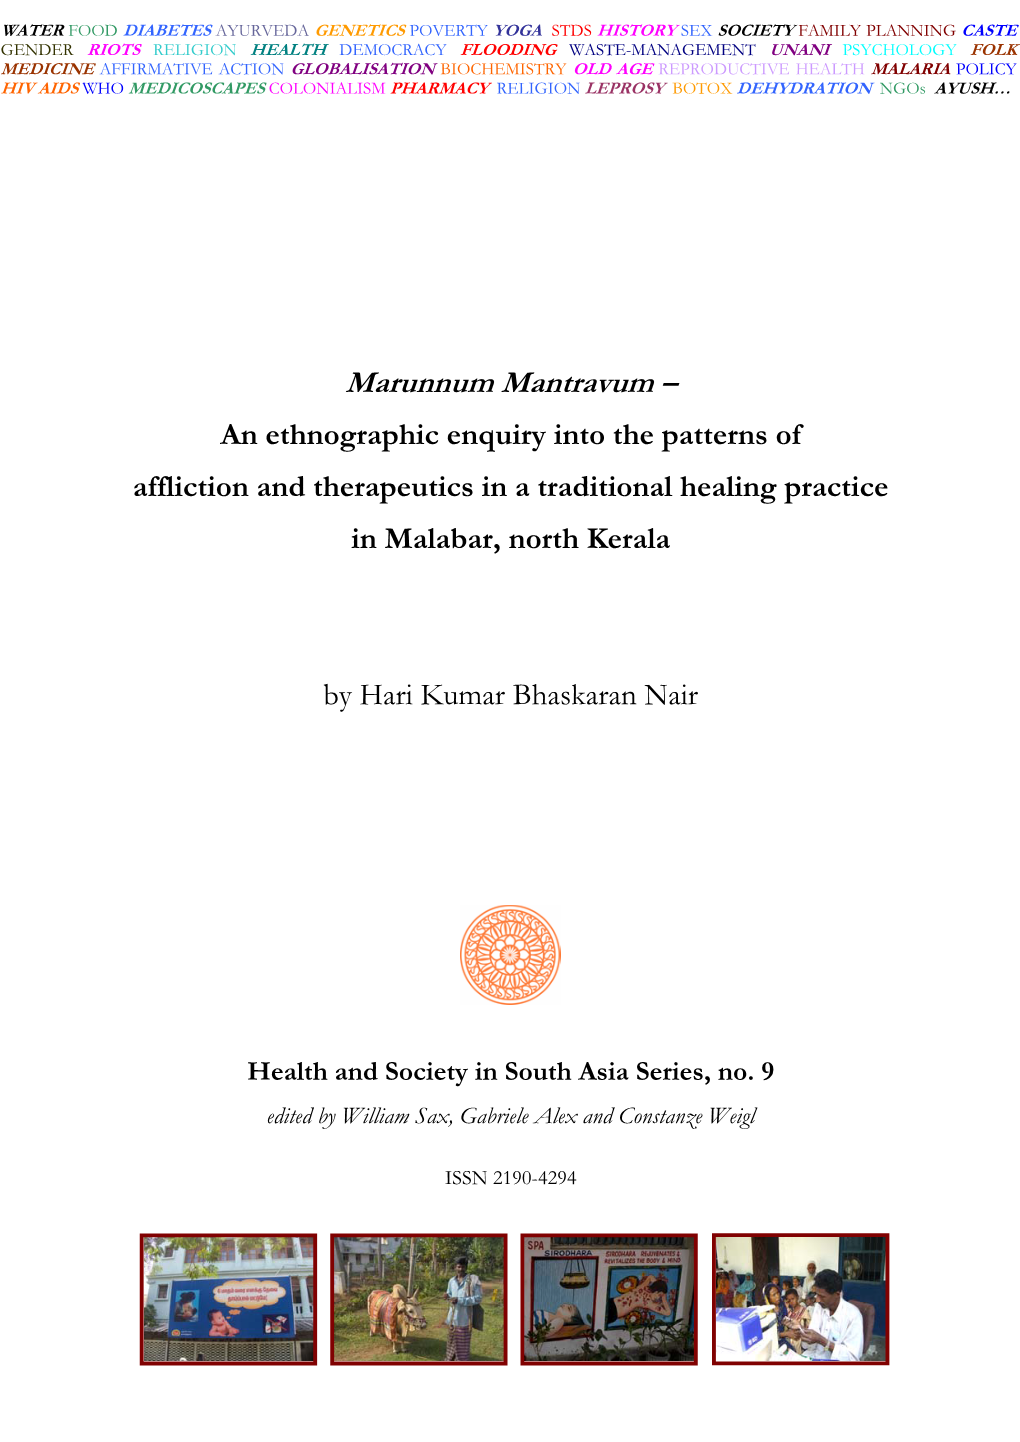 Marunnum Mantravum – an Ethnographic Enquiry Into the Patterns of Affliction and Therapeutics in a Traditional Healing Practice in Malabar, North Kerala